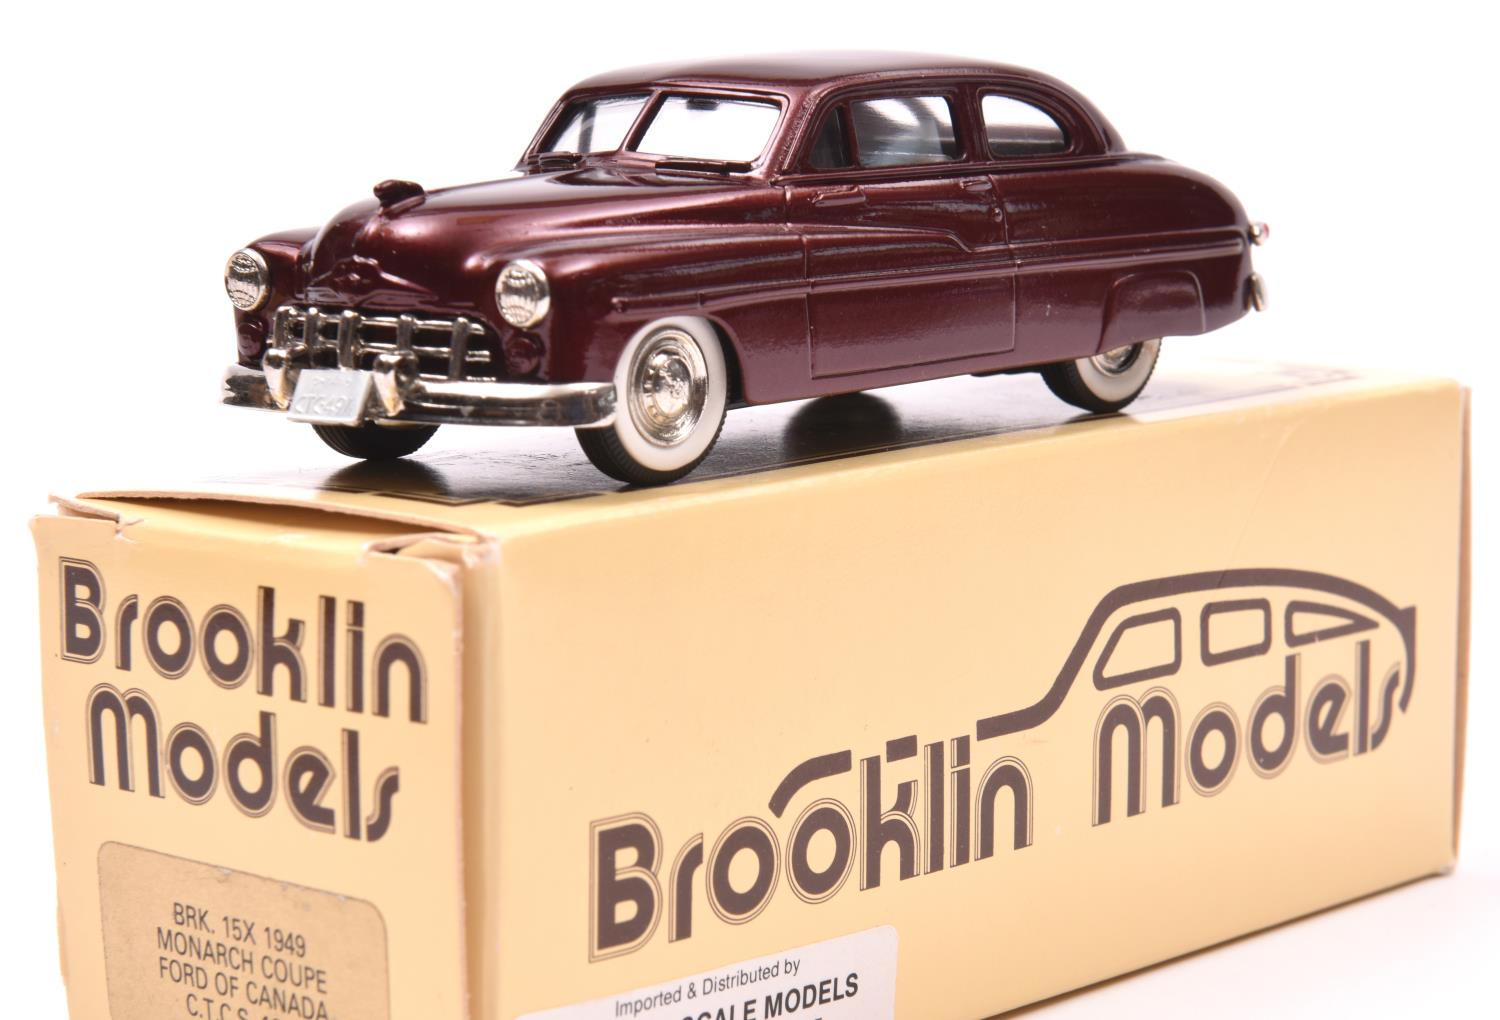 Brooklin Models BRK 15x 1949 Monarch Coupe, Ford of Canada. A 1990 C.T.C.S. Limited Edition, 1/